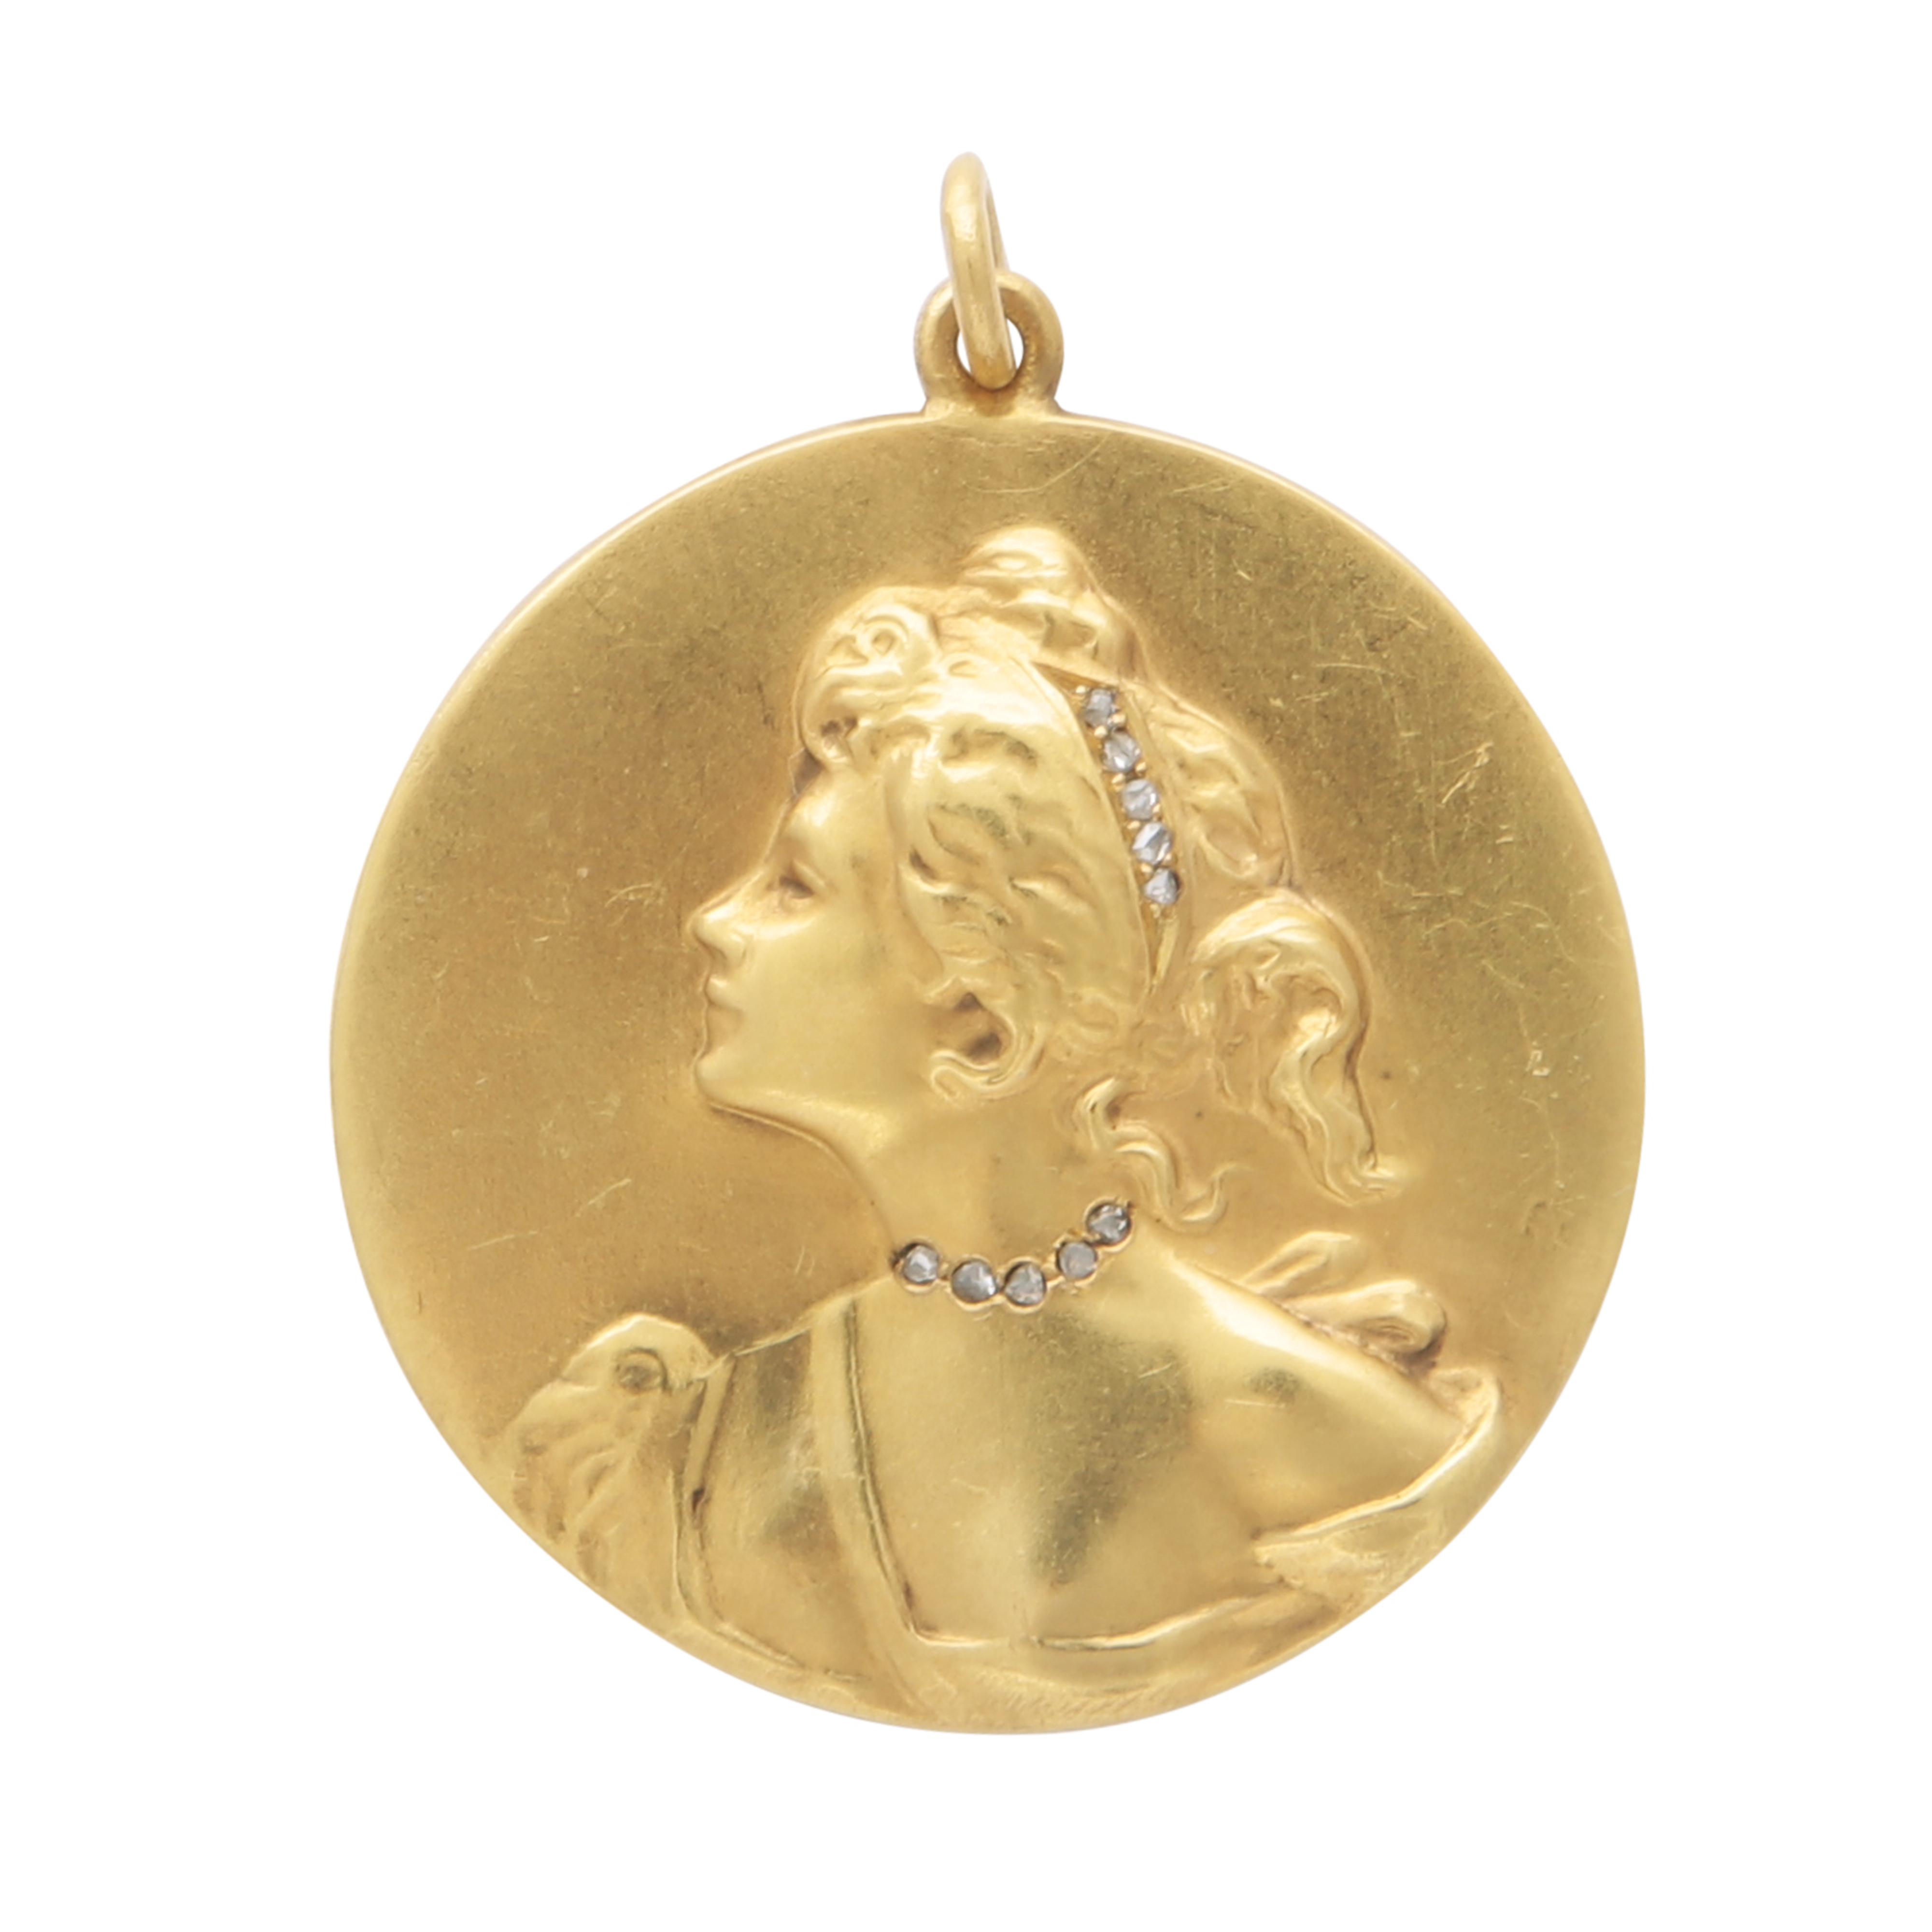 An Art Nouveau jewelled medallion pendant in high carat yellow gold, the circular medallion with